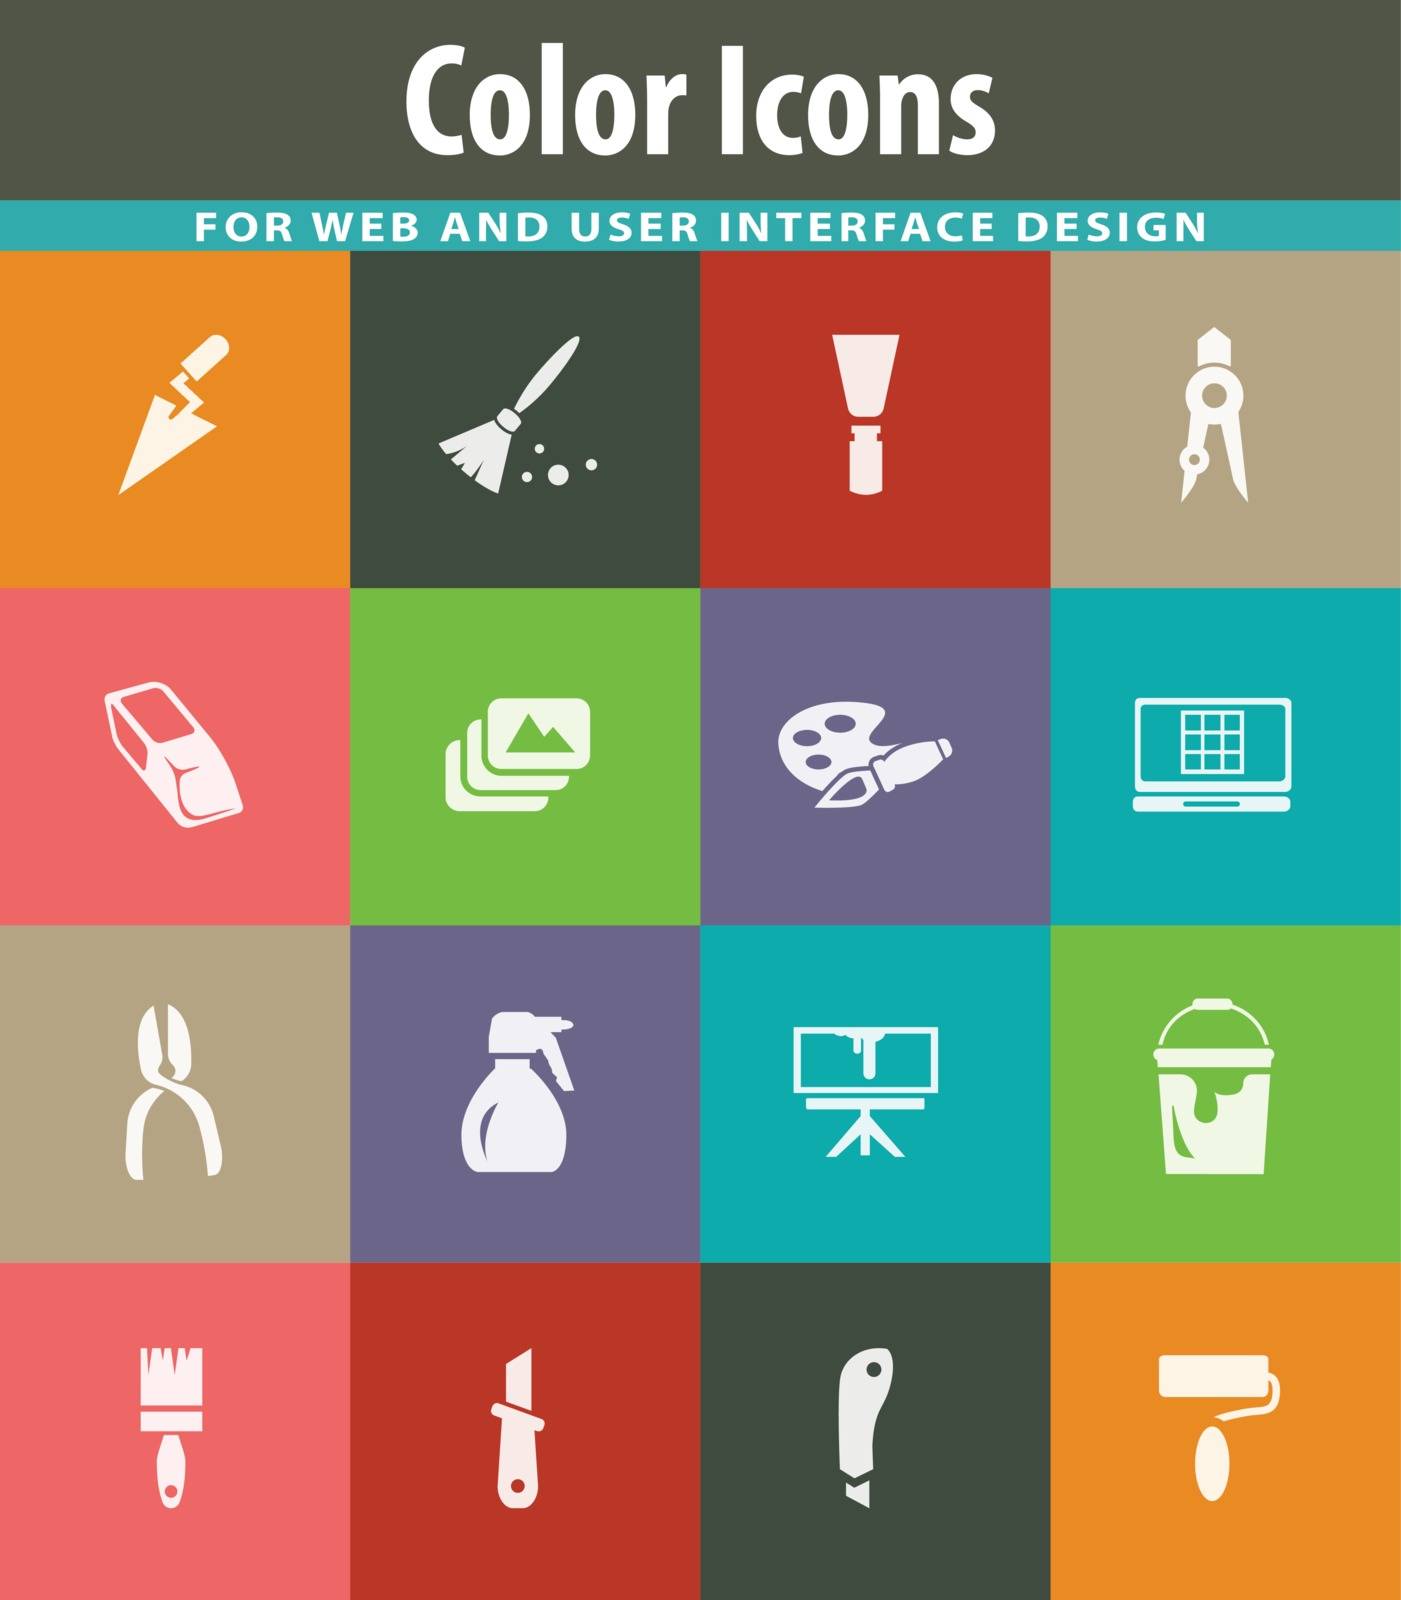 Art tools easy flat web icons for user interface design